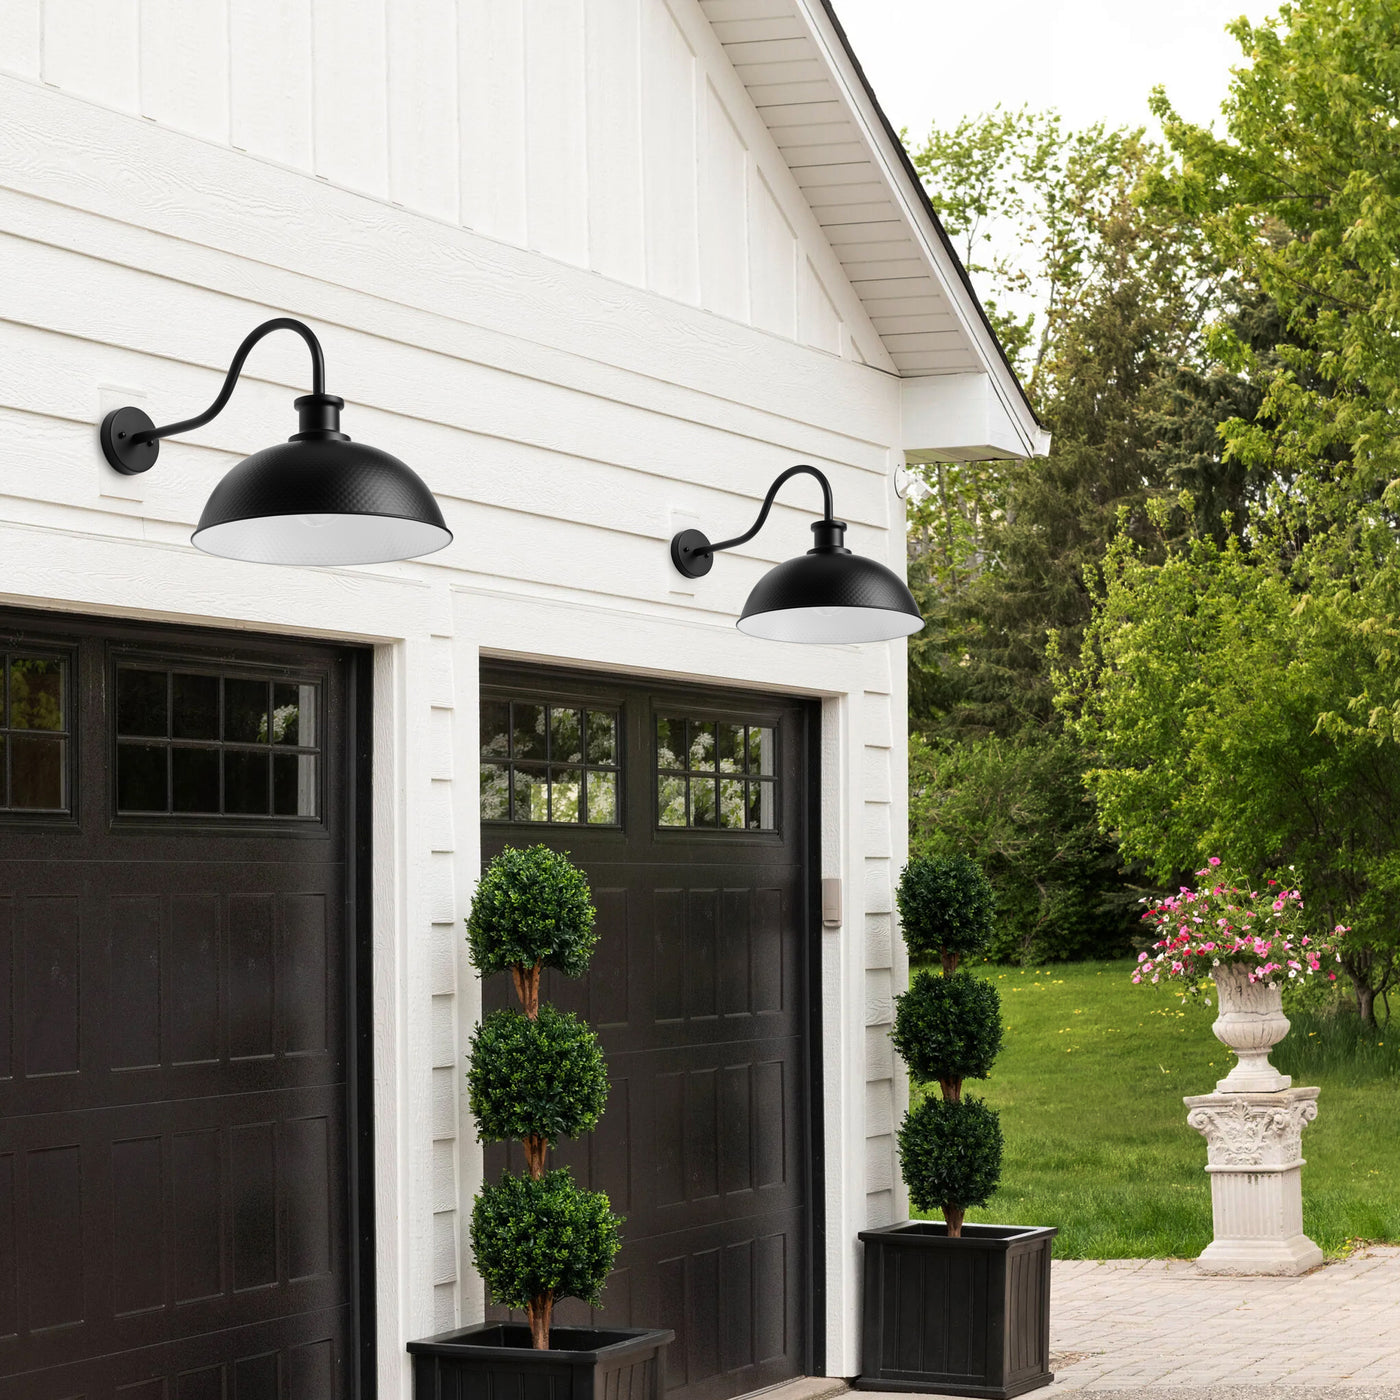 1-Light Creative Black Vintage Style Wall Sconces Outdoor Lights